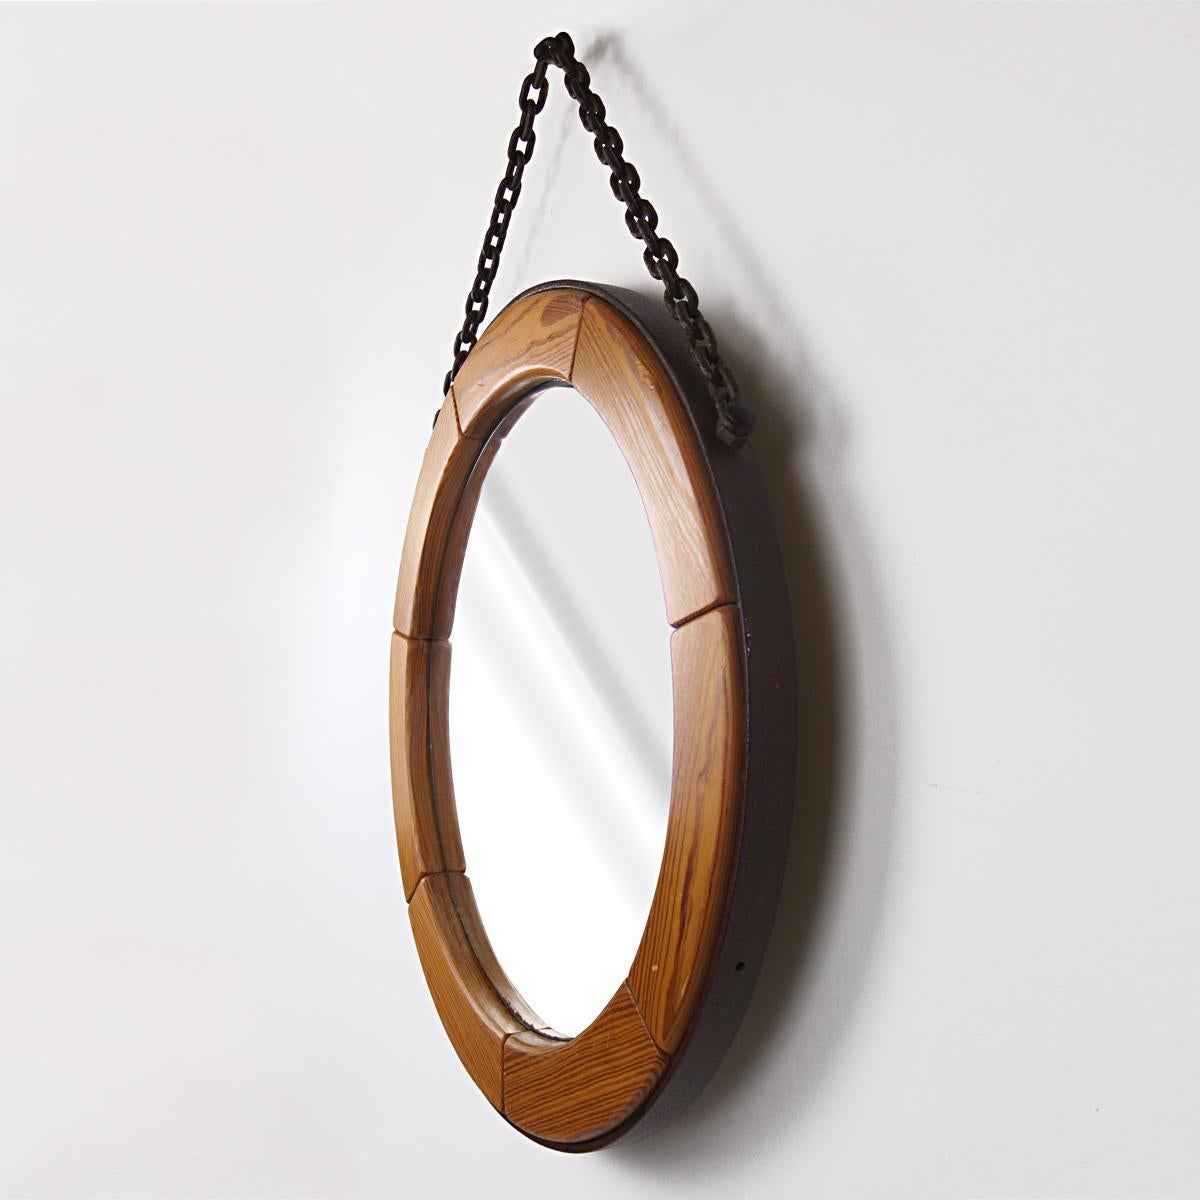 Heavy round mirror in 7 wood segments set in a wrought-iron frame. 
A stylish brutalist detail is the steel chain to hang the mirror on the wall.
Probably of Scandinavian origin.